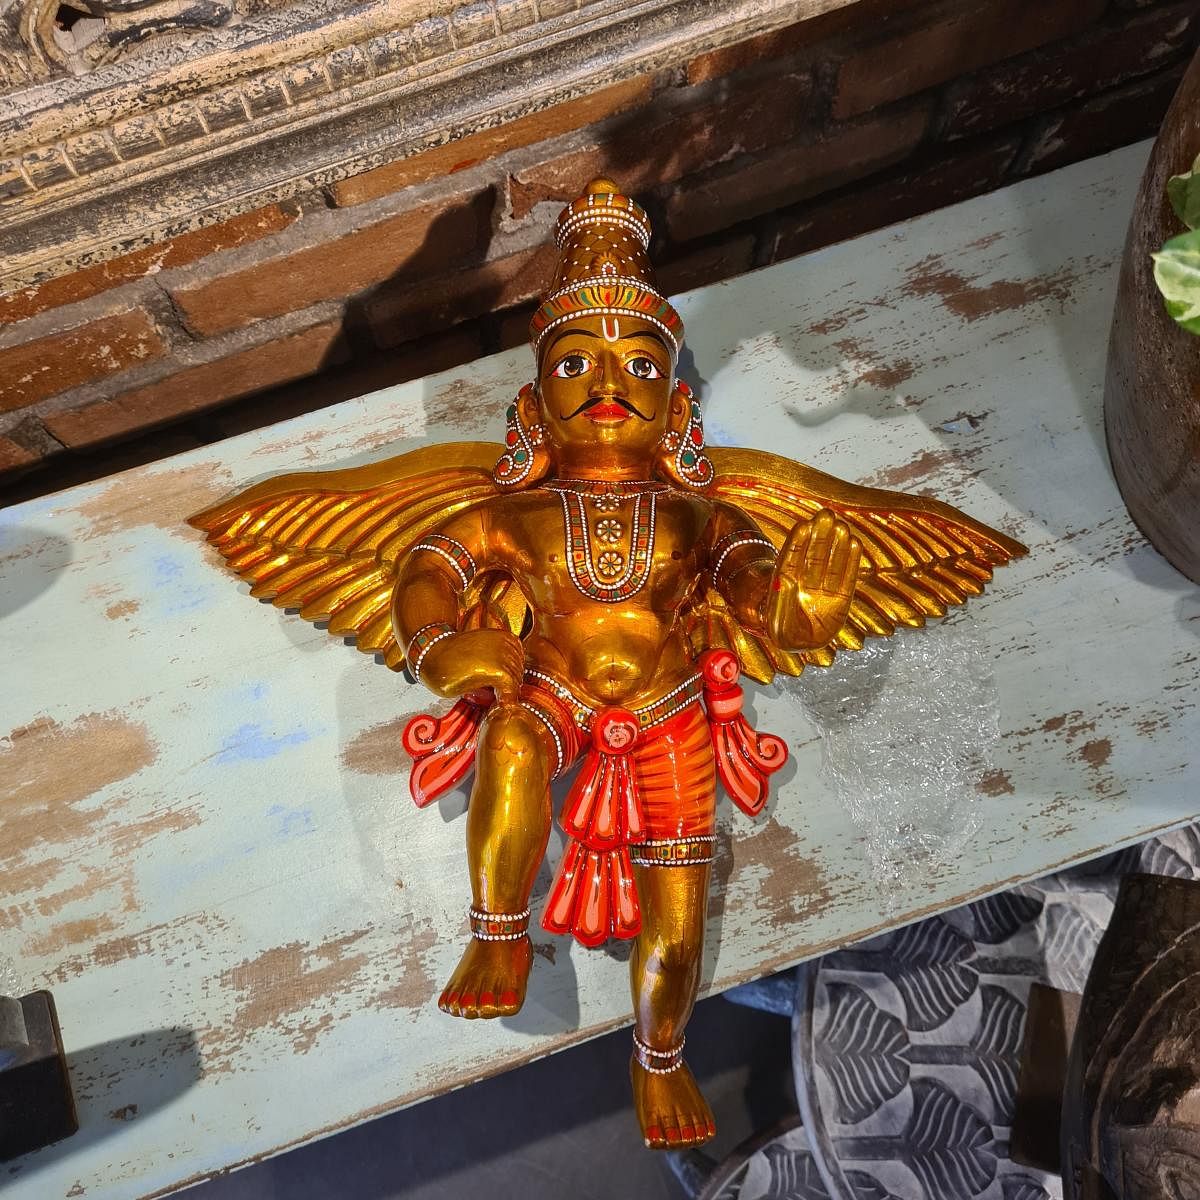 A golden figurine, painted using metallic colours. Photo by Santosh Chitragar